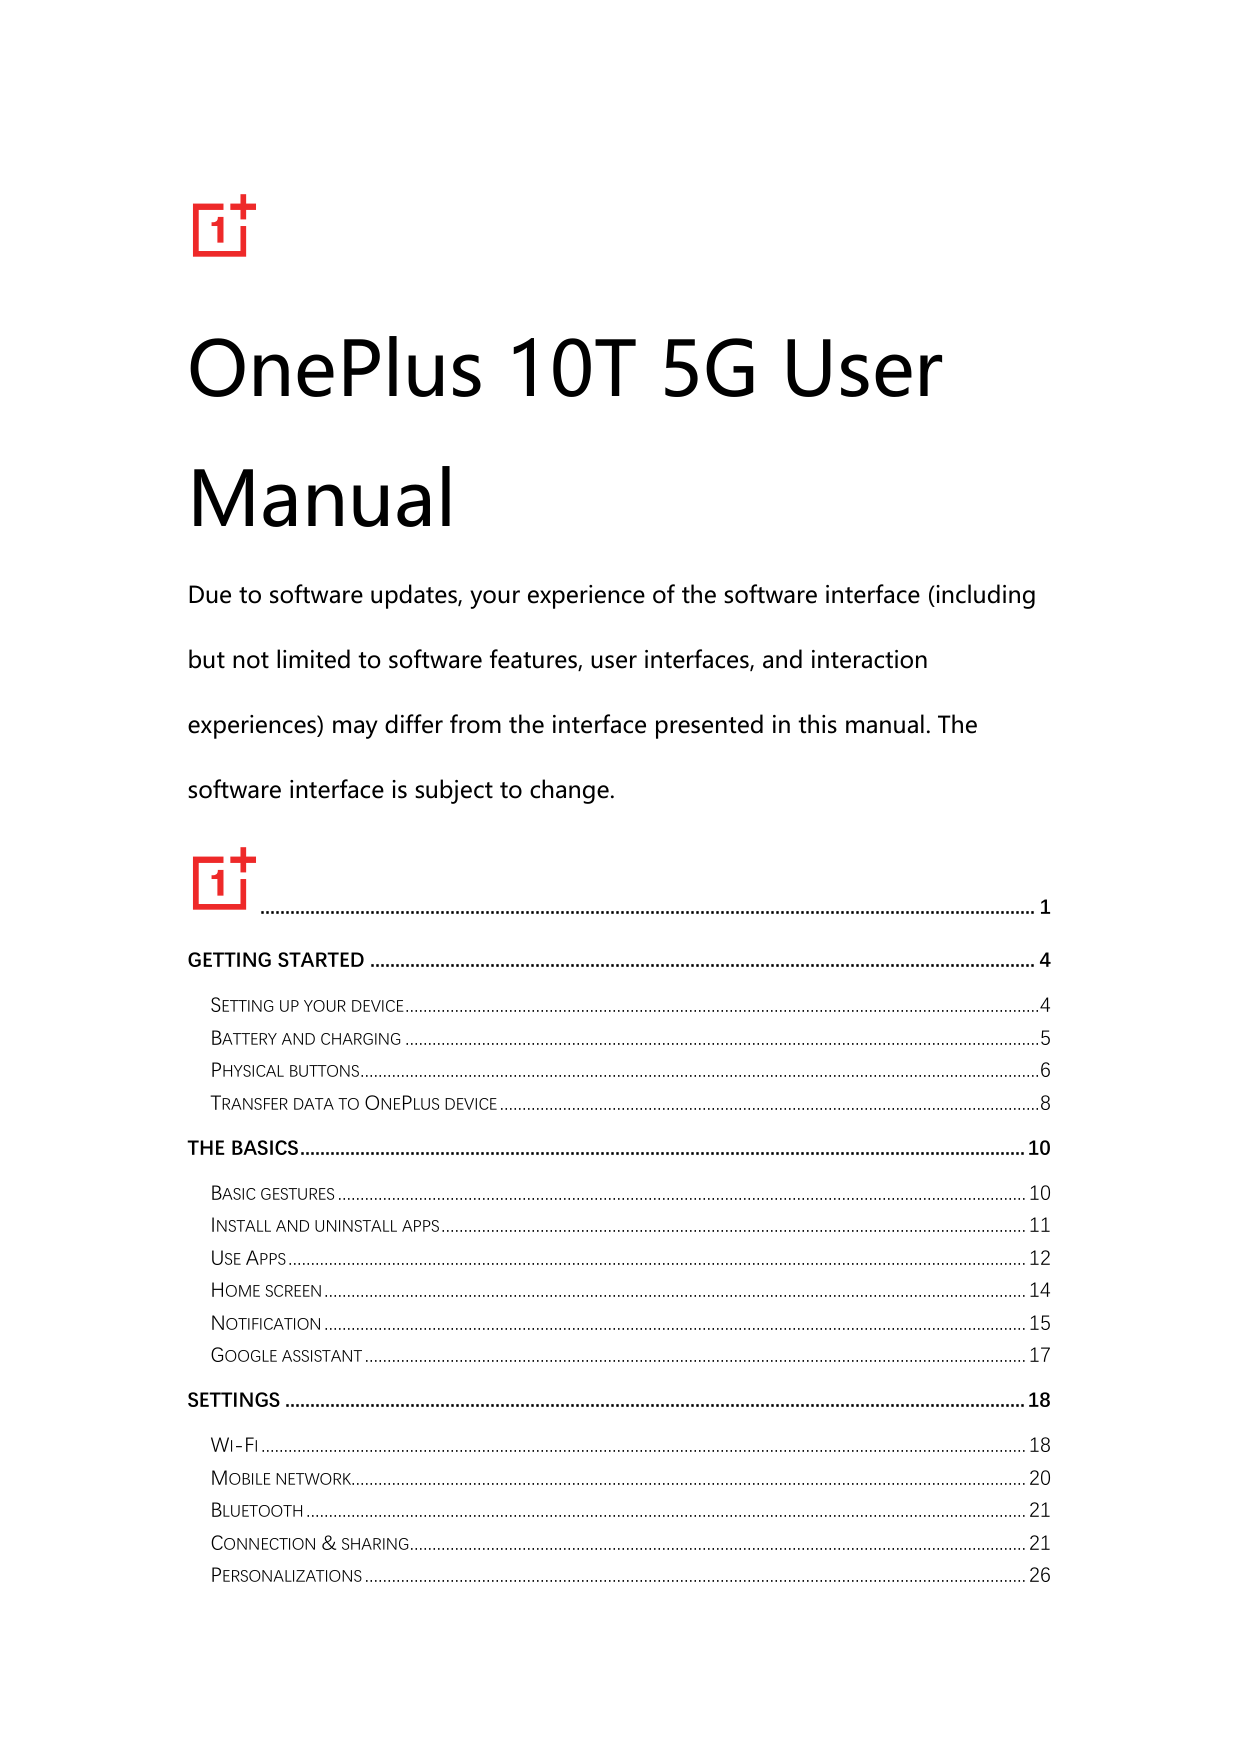 OnePlus 10T 5G UserManualDue to software updates, your experience of the software interface (includingbut not limited to softwar